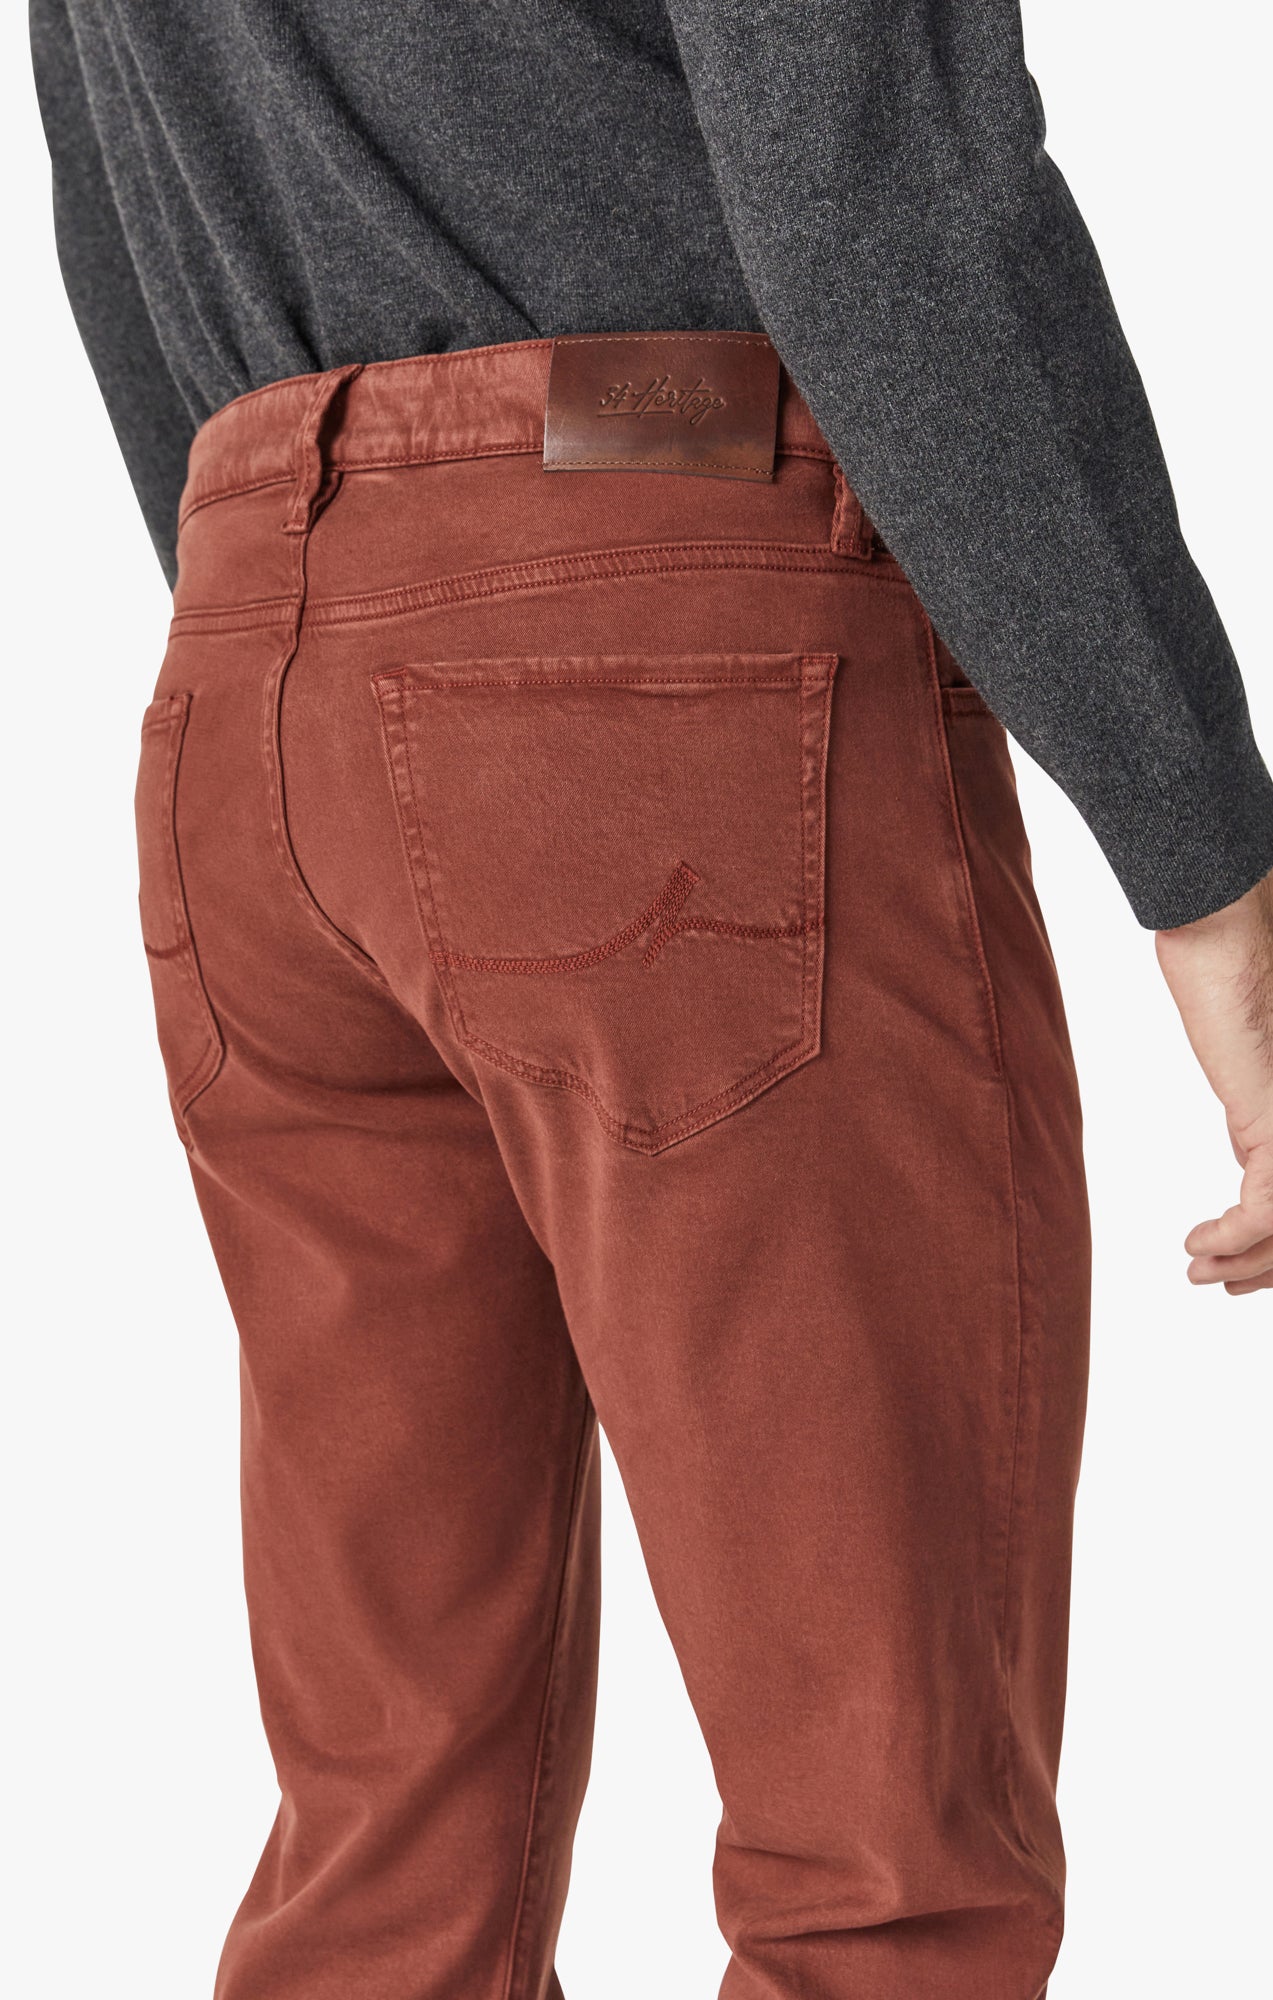 Cool Tapered Leg Pants in Cinnamon Brushed Twill Image 5